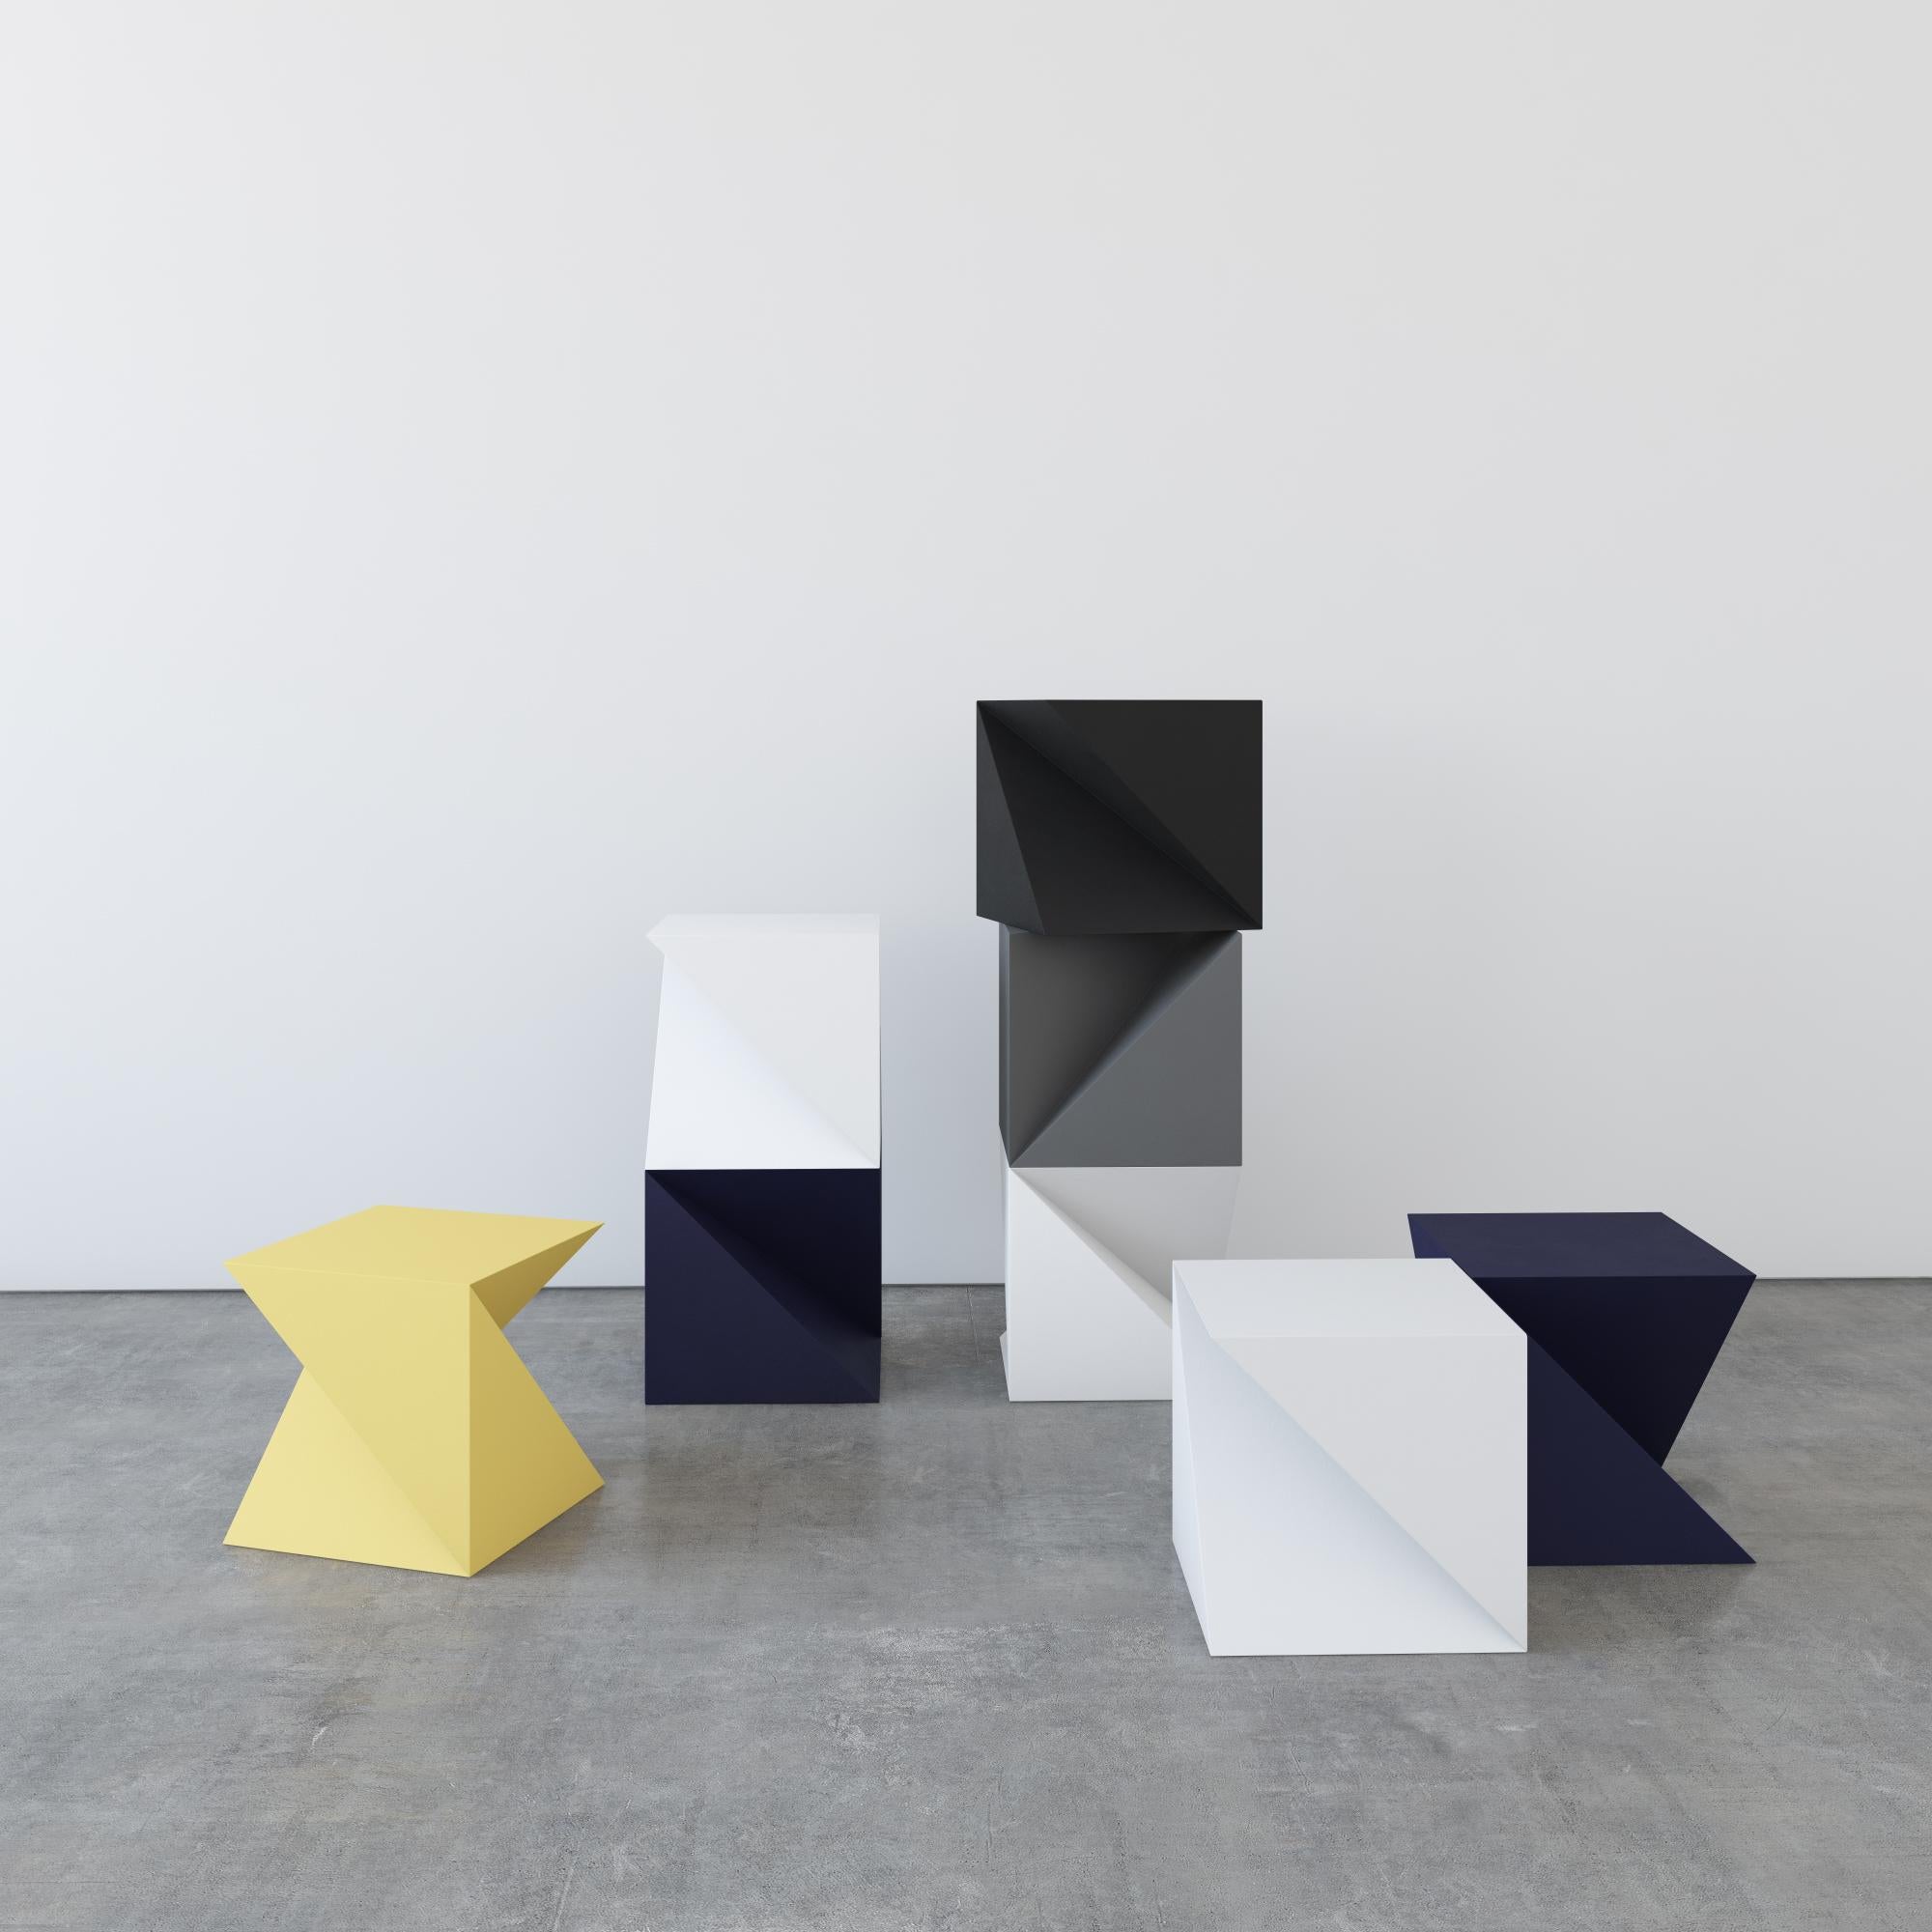 A multi-function object. 
Artist Alexey Krupinin

Its complex geometric shape is made of wood with a painted semi-gloss finish, creating unique silhouettes from different angles. You can use it as a side table, or stack a few of them to create a